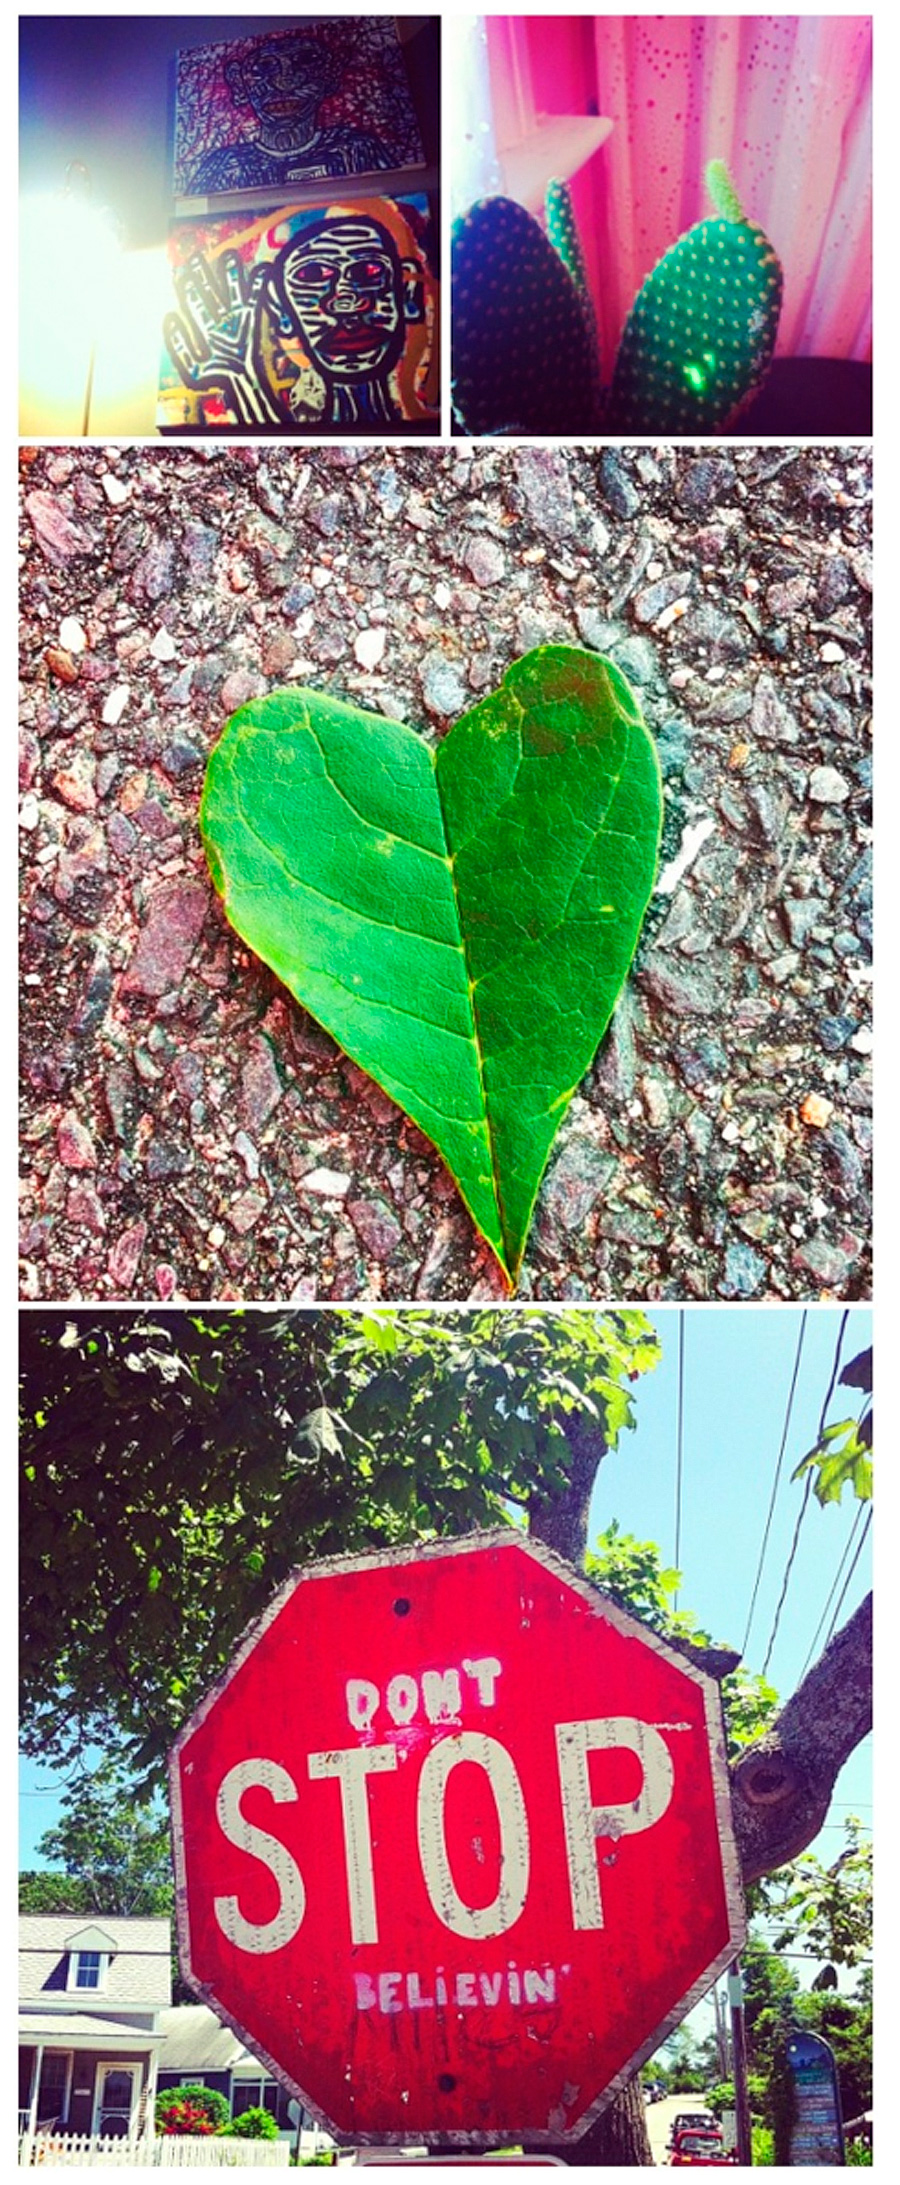 Some randomness: I got to see my brother's artwork on display (twice!), got a cactus (and it started sprouting mini cacti), found an awesome heart-shaped leaf, AND found this amazing stop sign on Peaks Island.